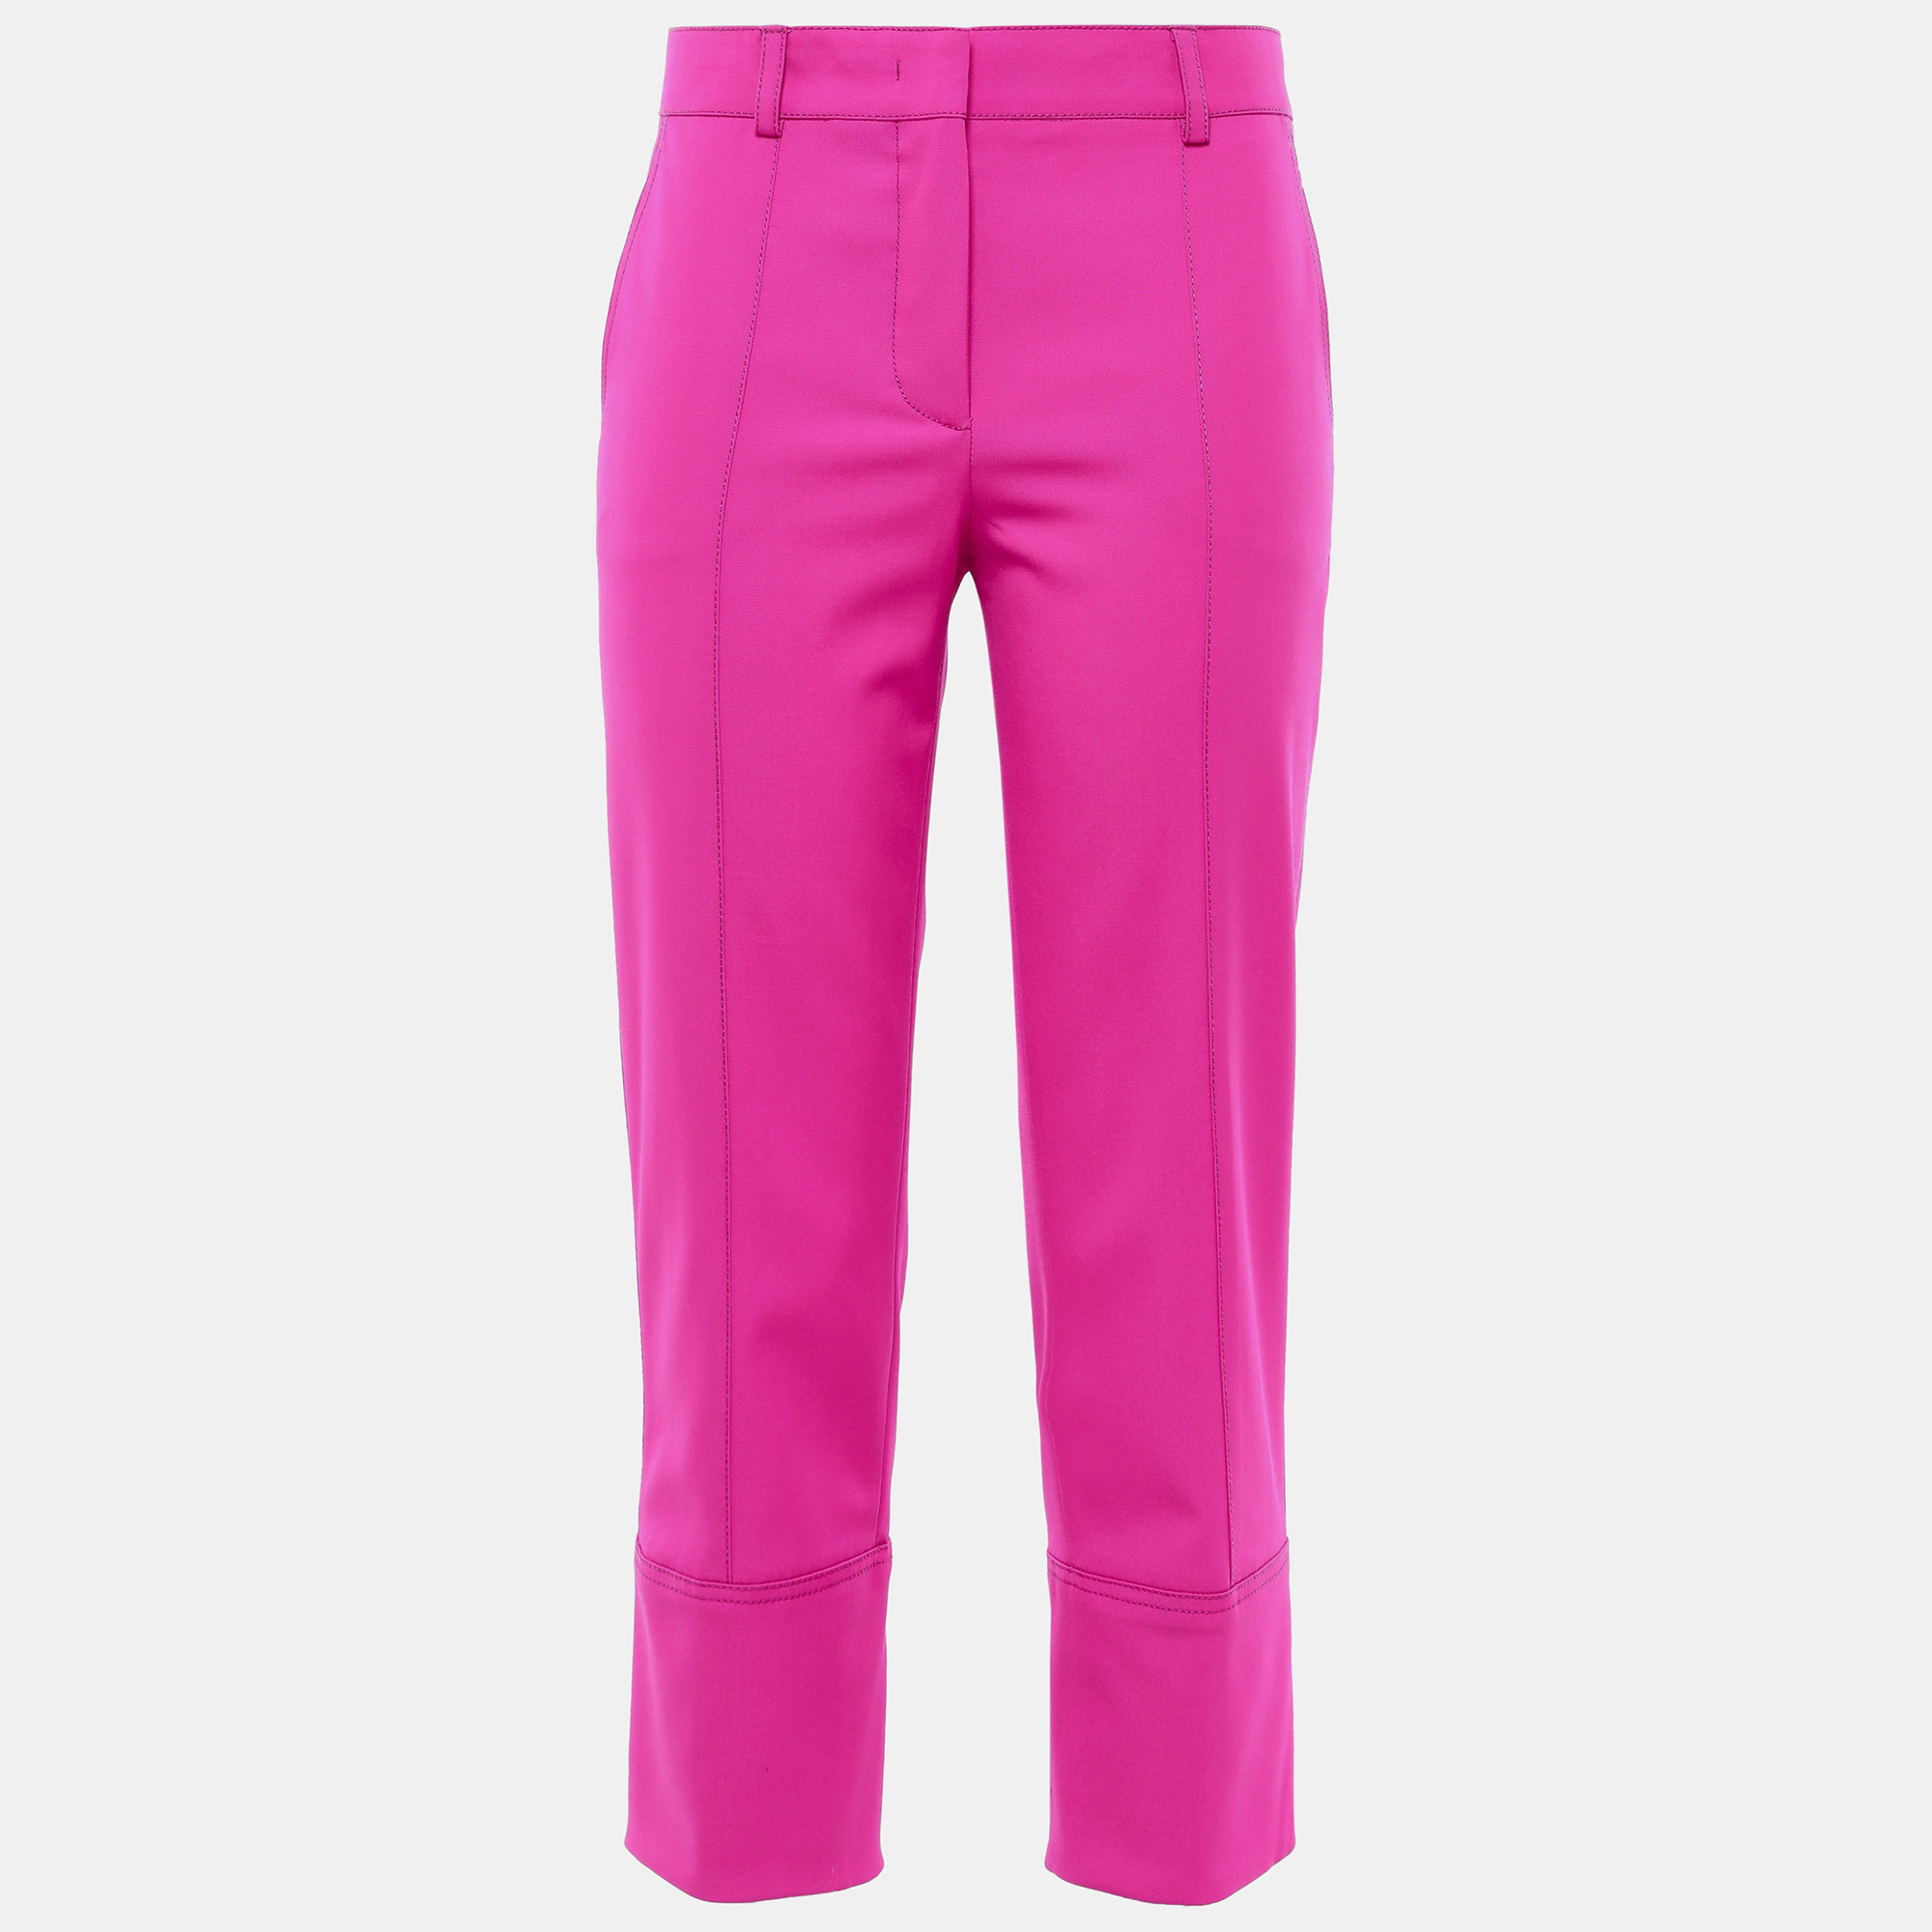 Emilio pucci pink wool cropped pants s (it 38)